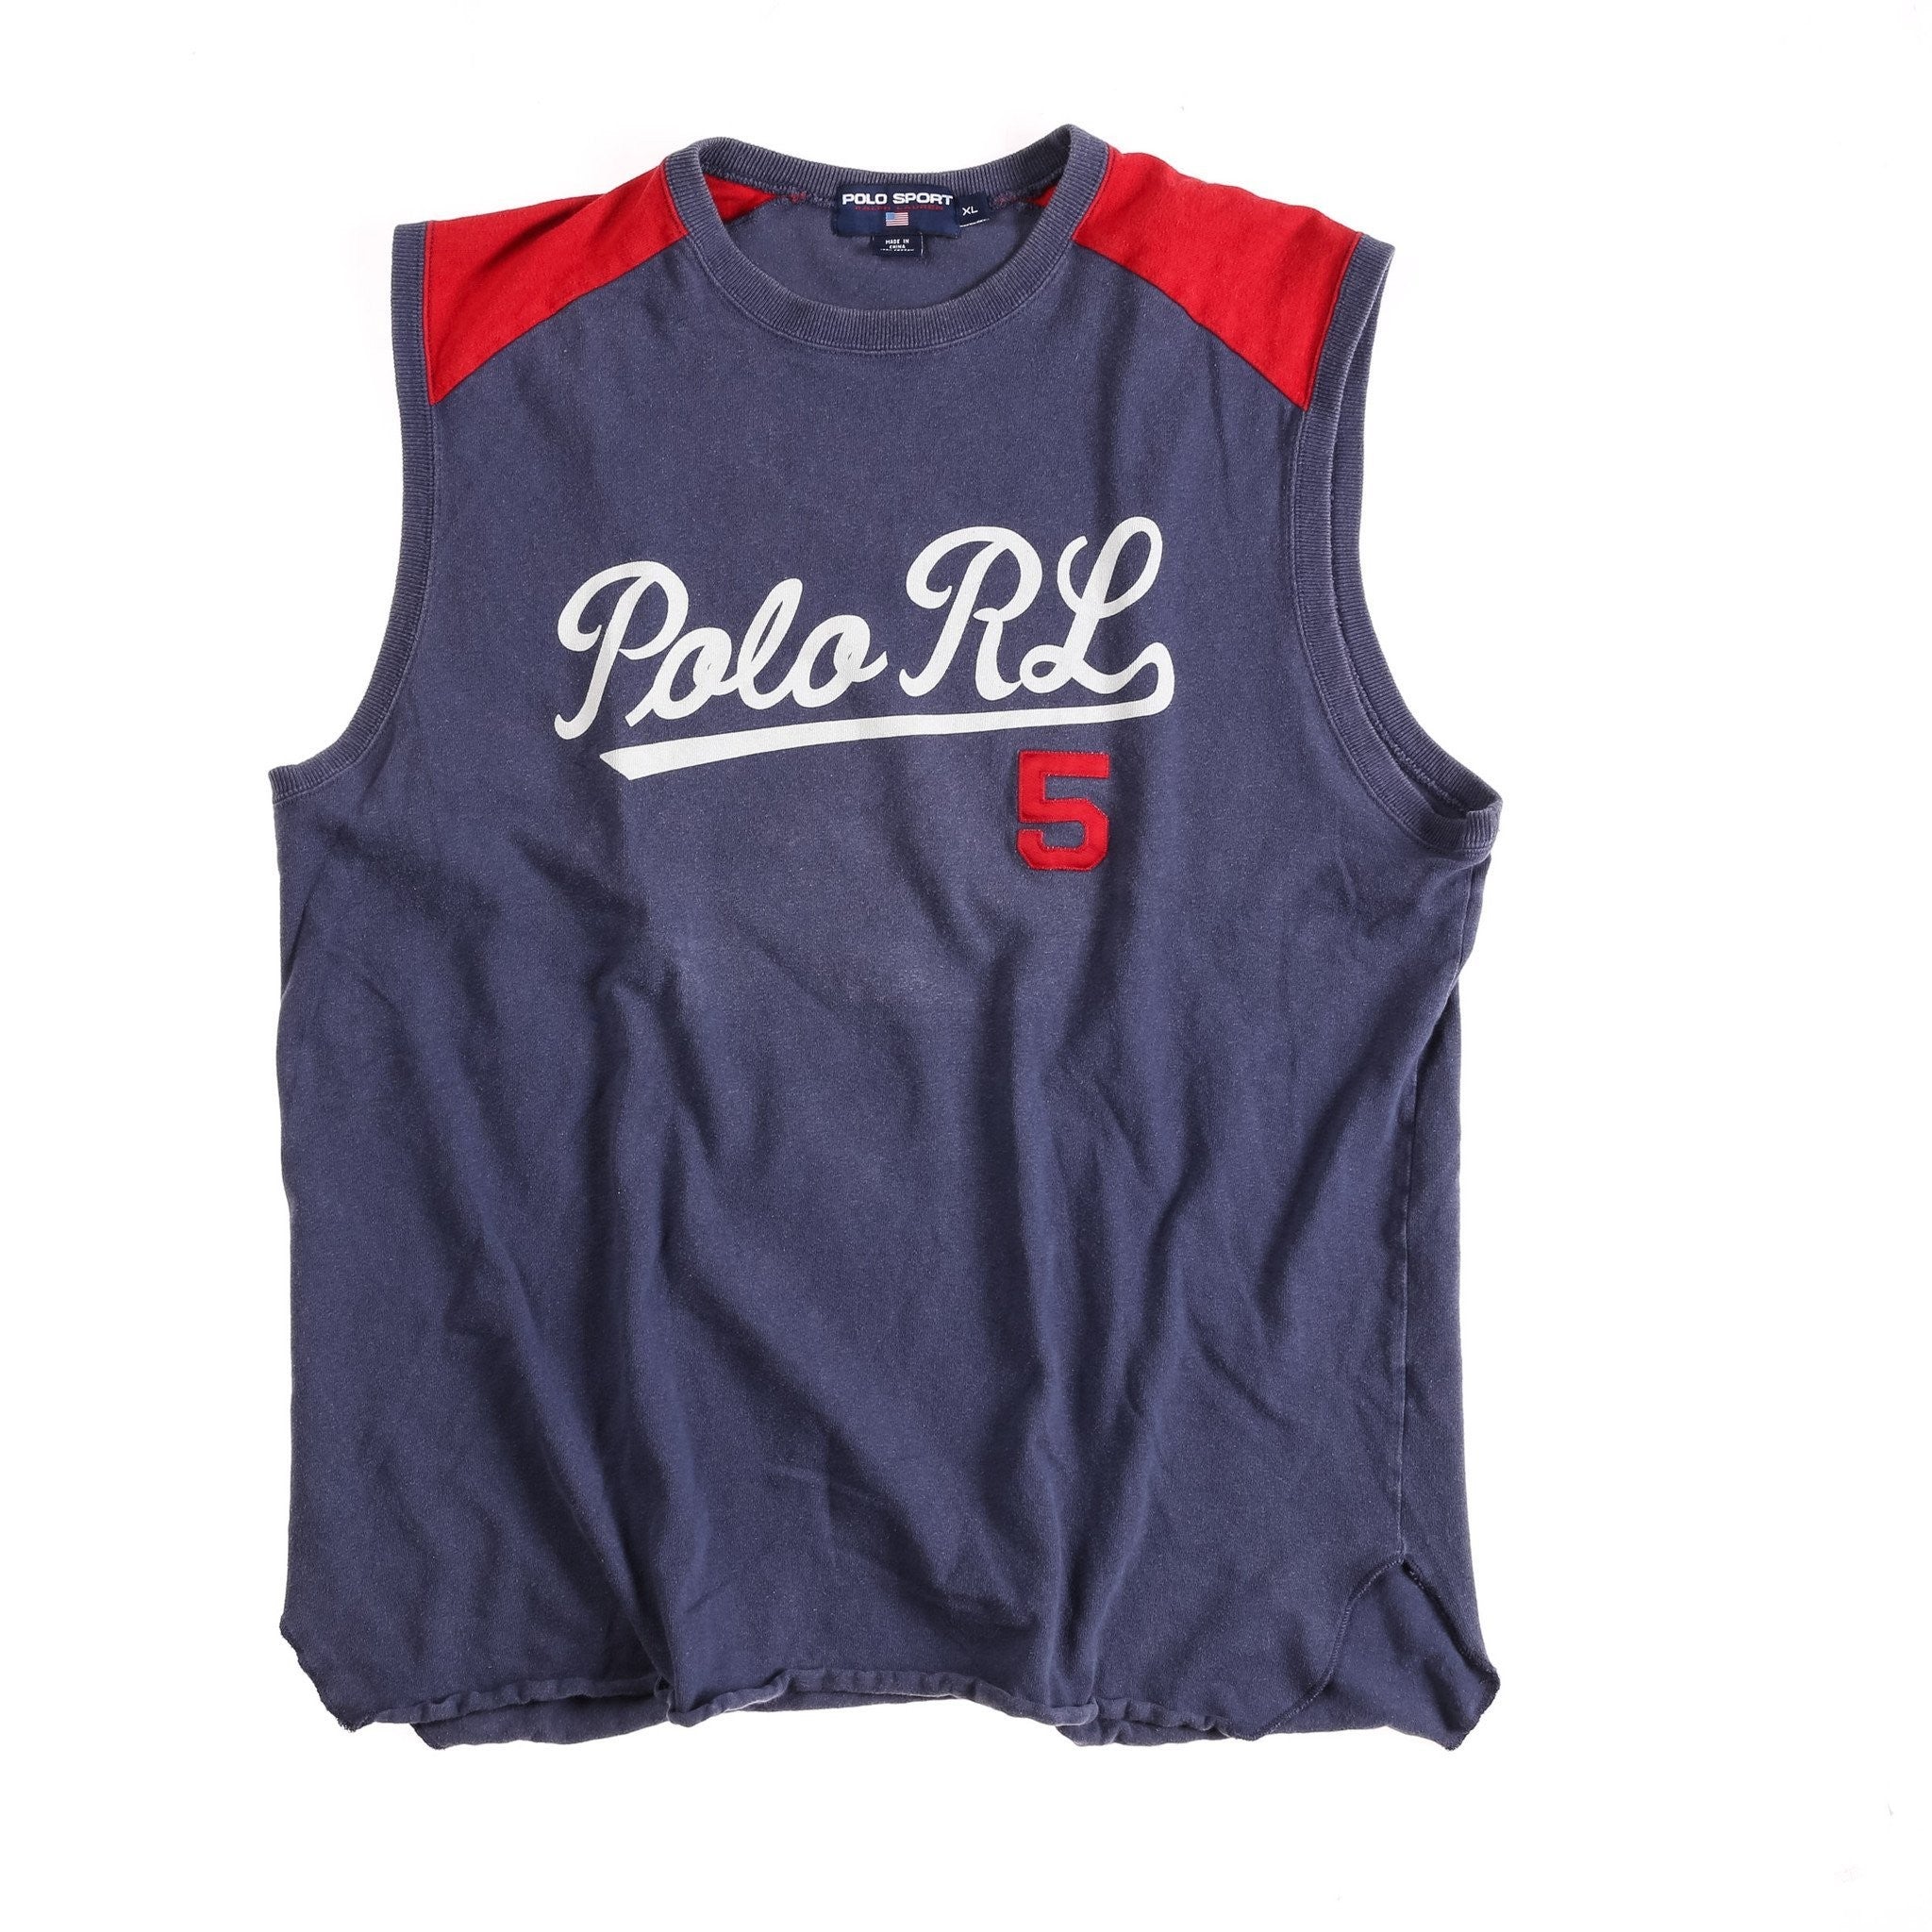 POLO SPORT PS SCRIPT MUSCLE TEE // BLUE RED